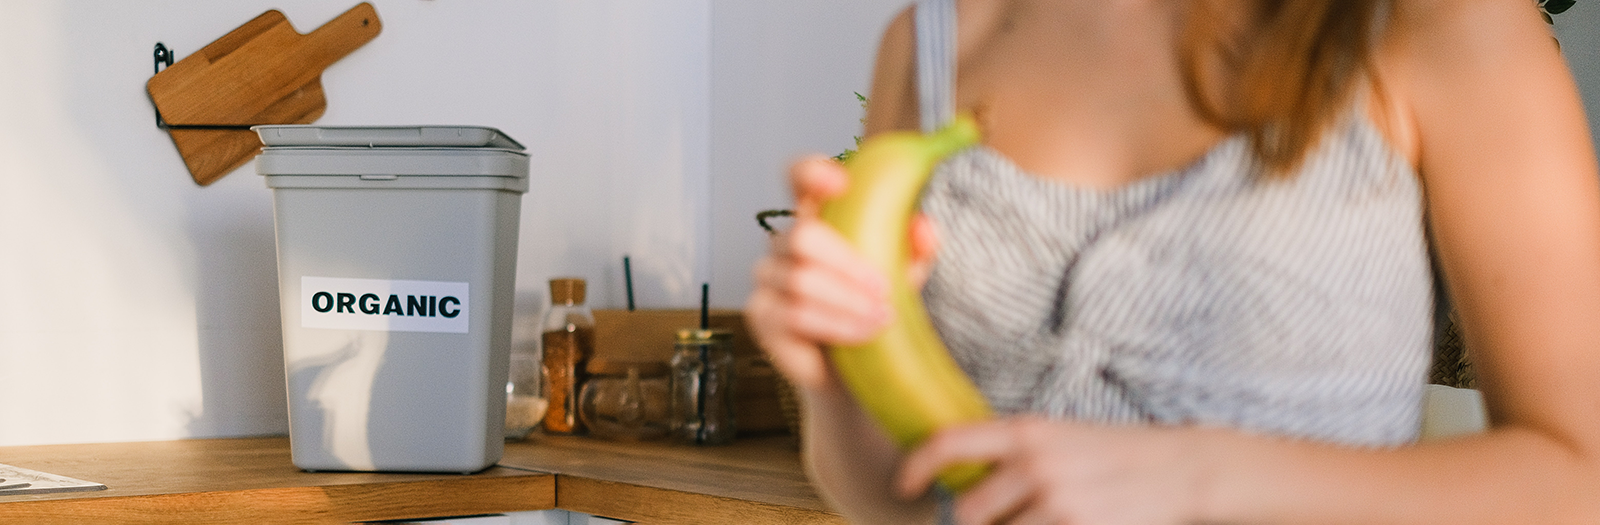 Person in kitchen holding a banana with organic bin